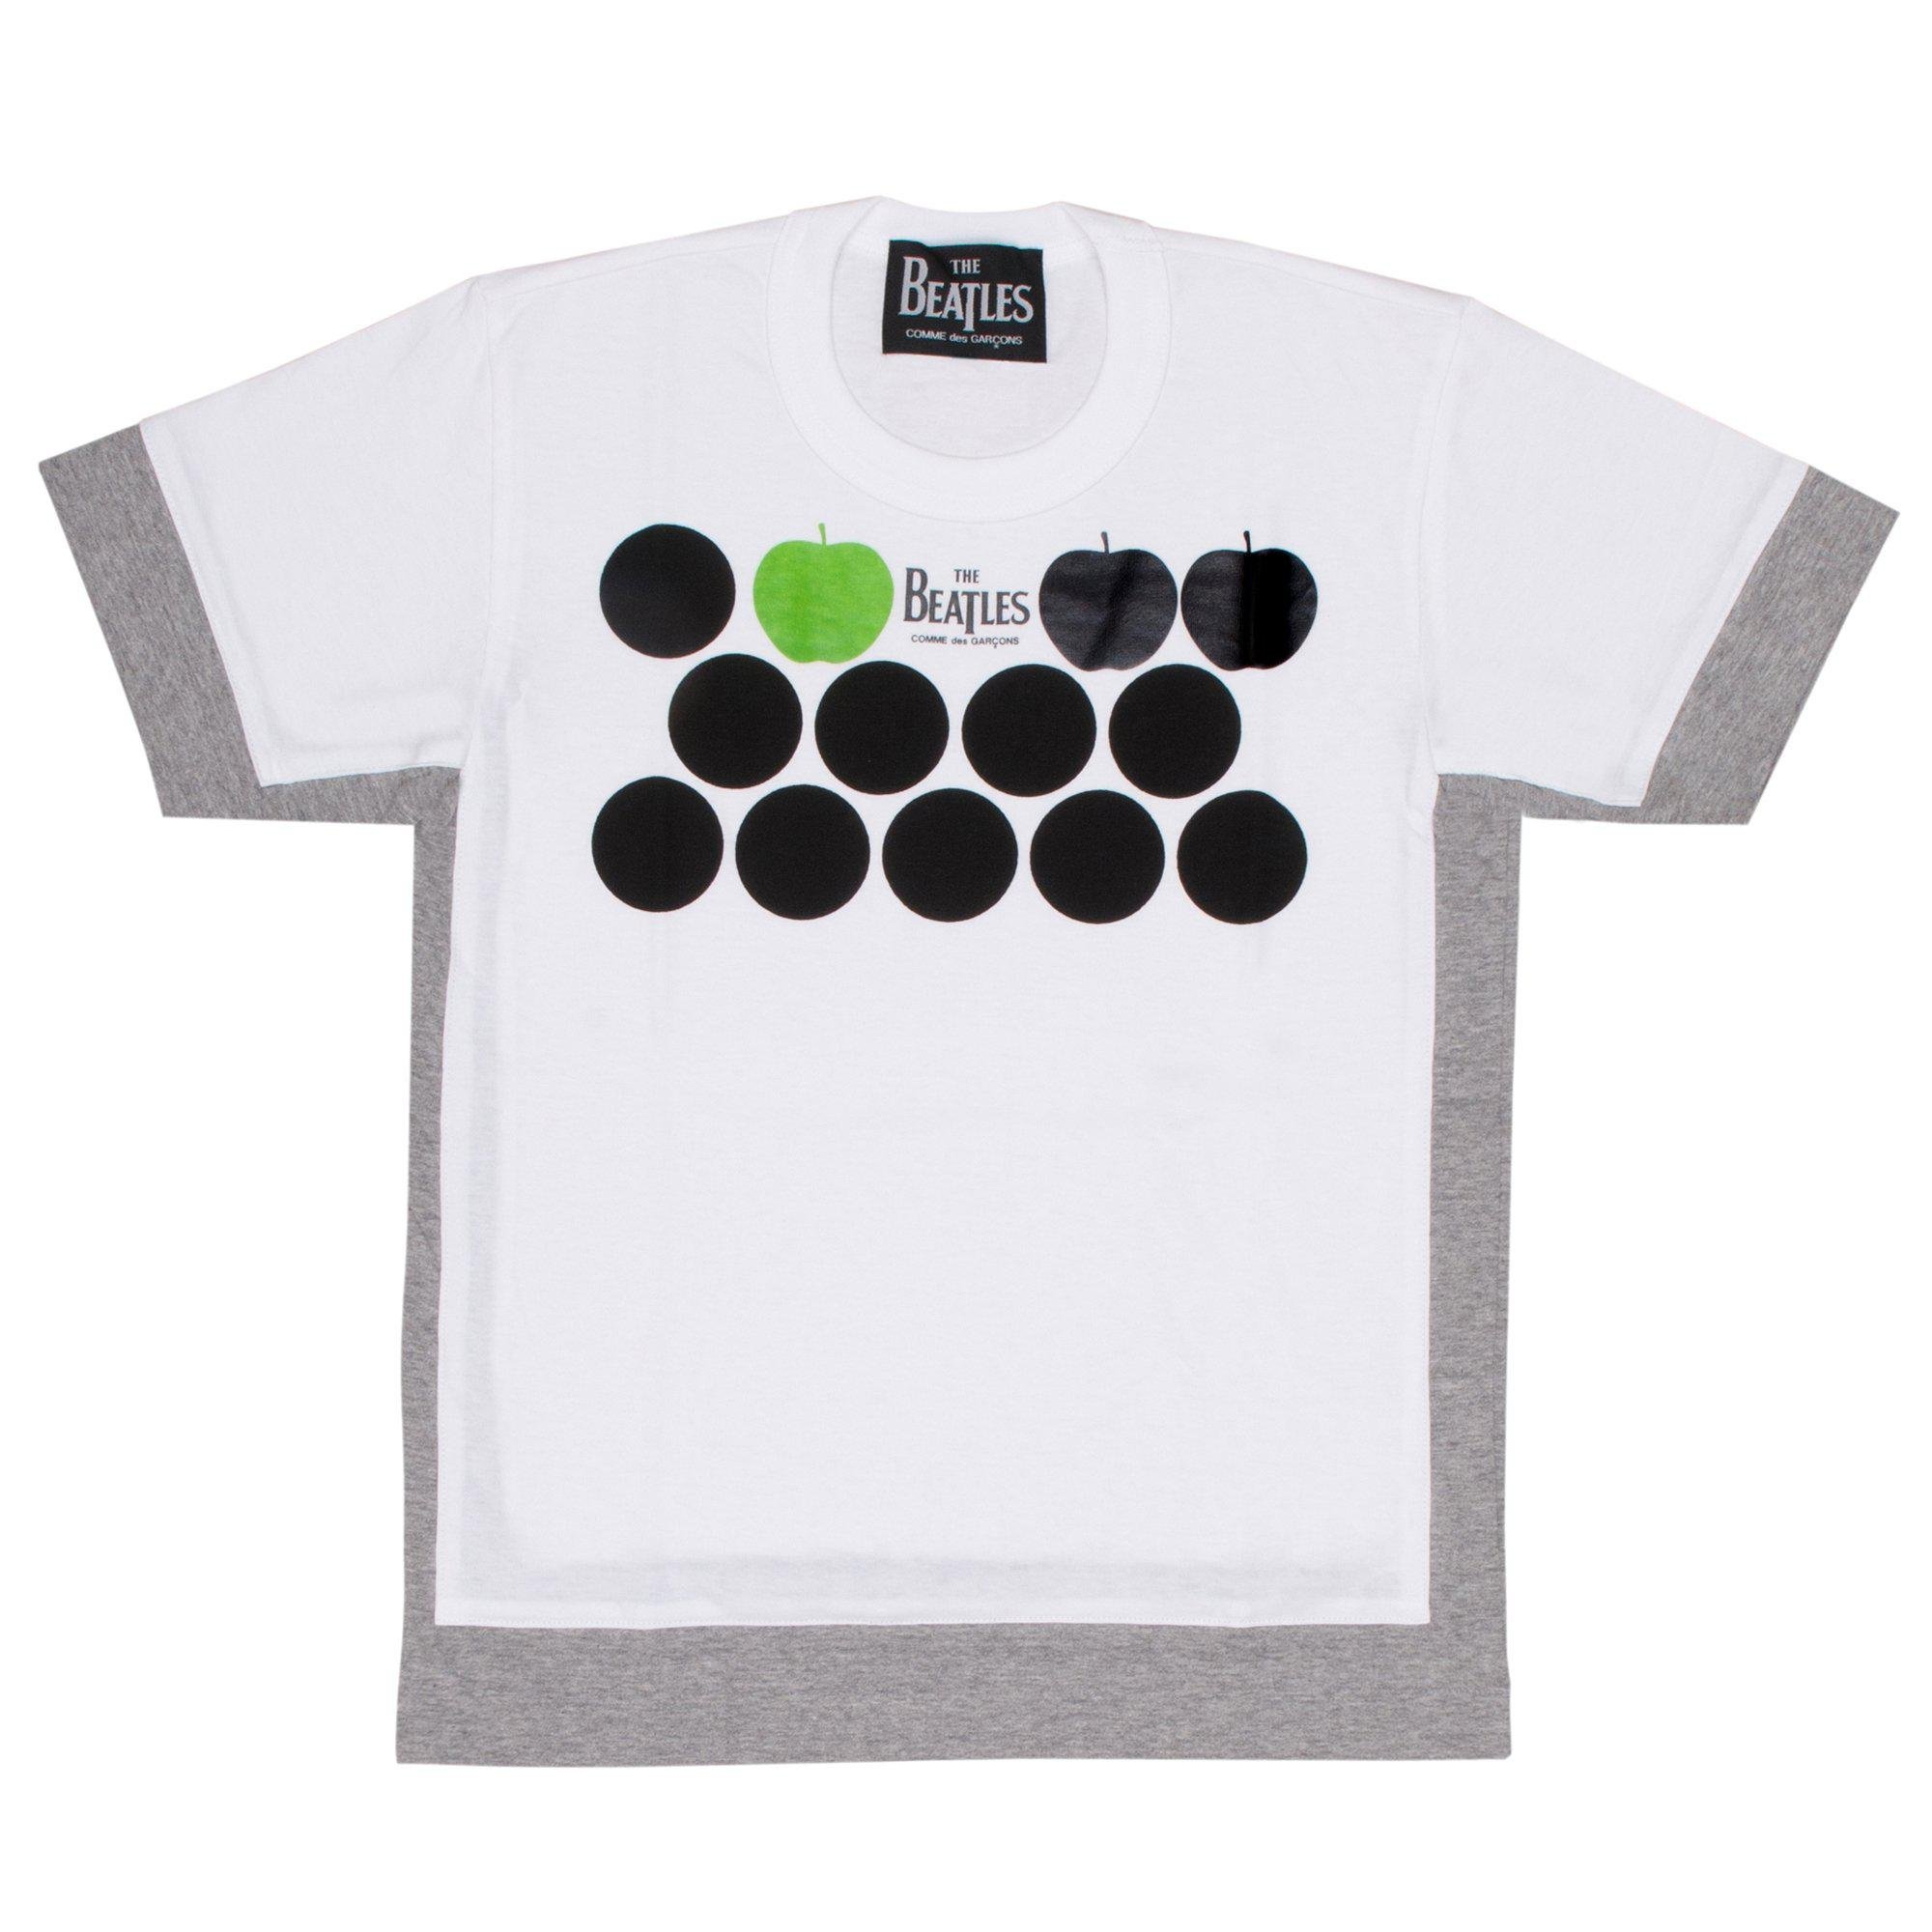 CDG Beatles - Tee Shirt - (Navy/White) by COMME DES GARCONS